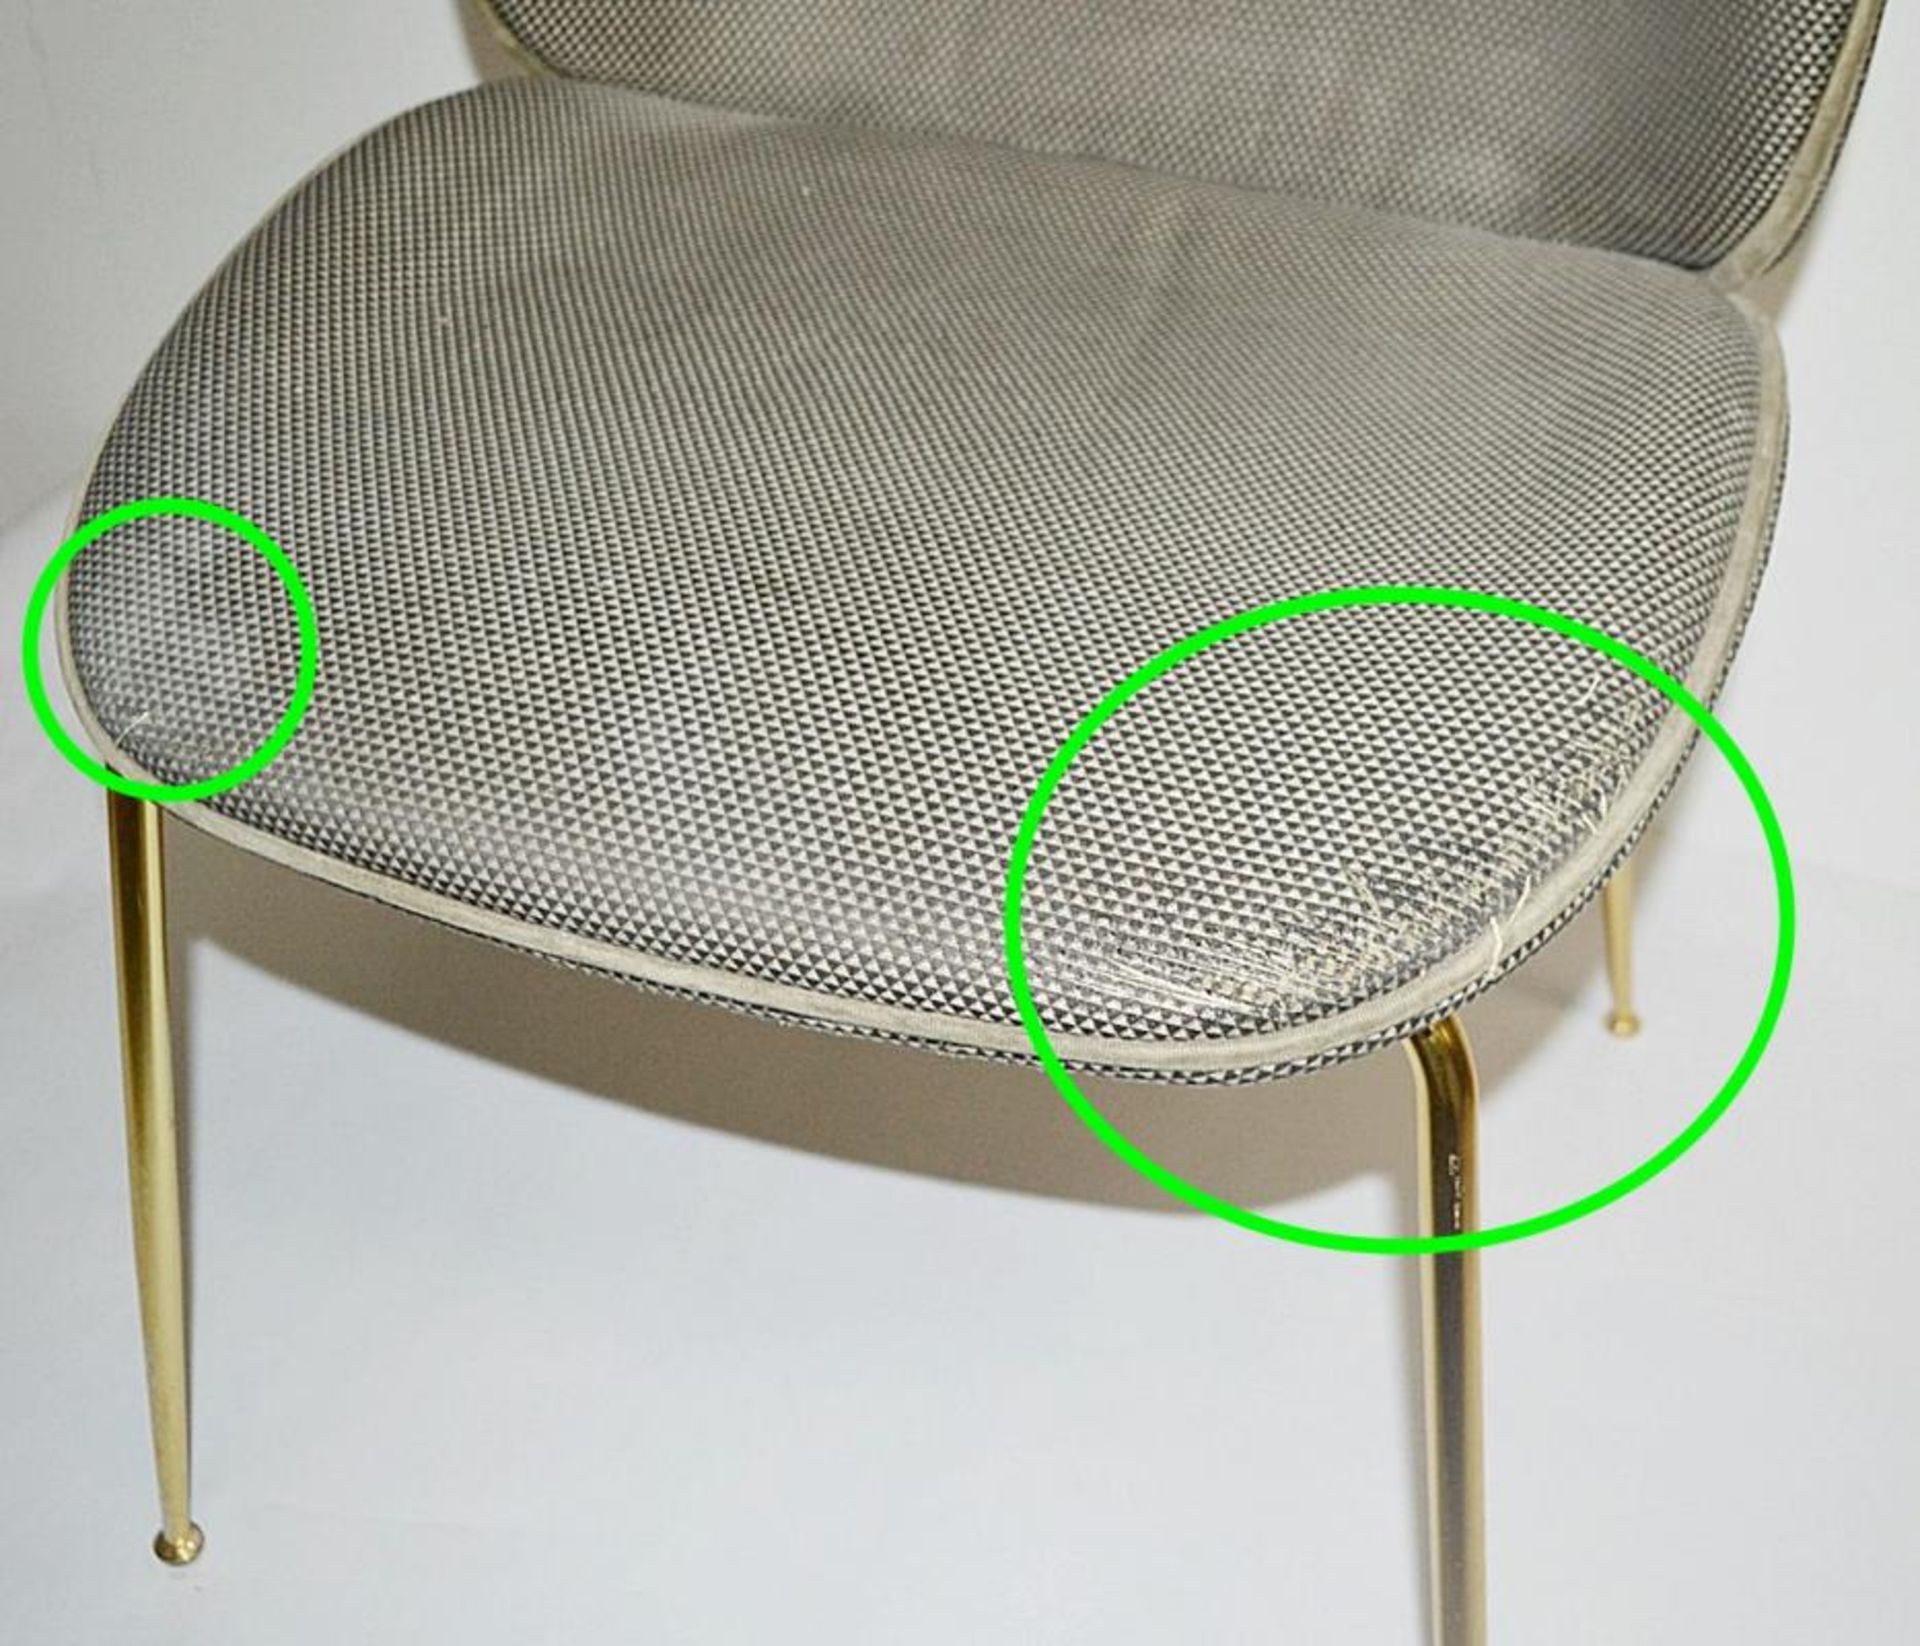 1 x GUBI 'Beetle Chair' - Designed By GamFratesi - Used, Please Read Condition Report - Dimensions: - Image 5 of 6